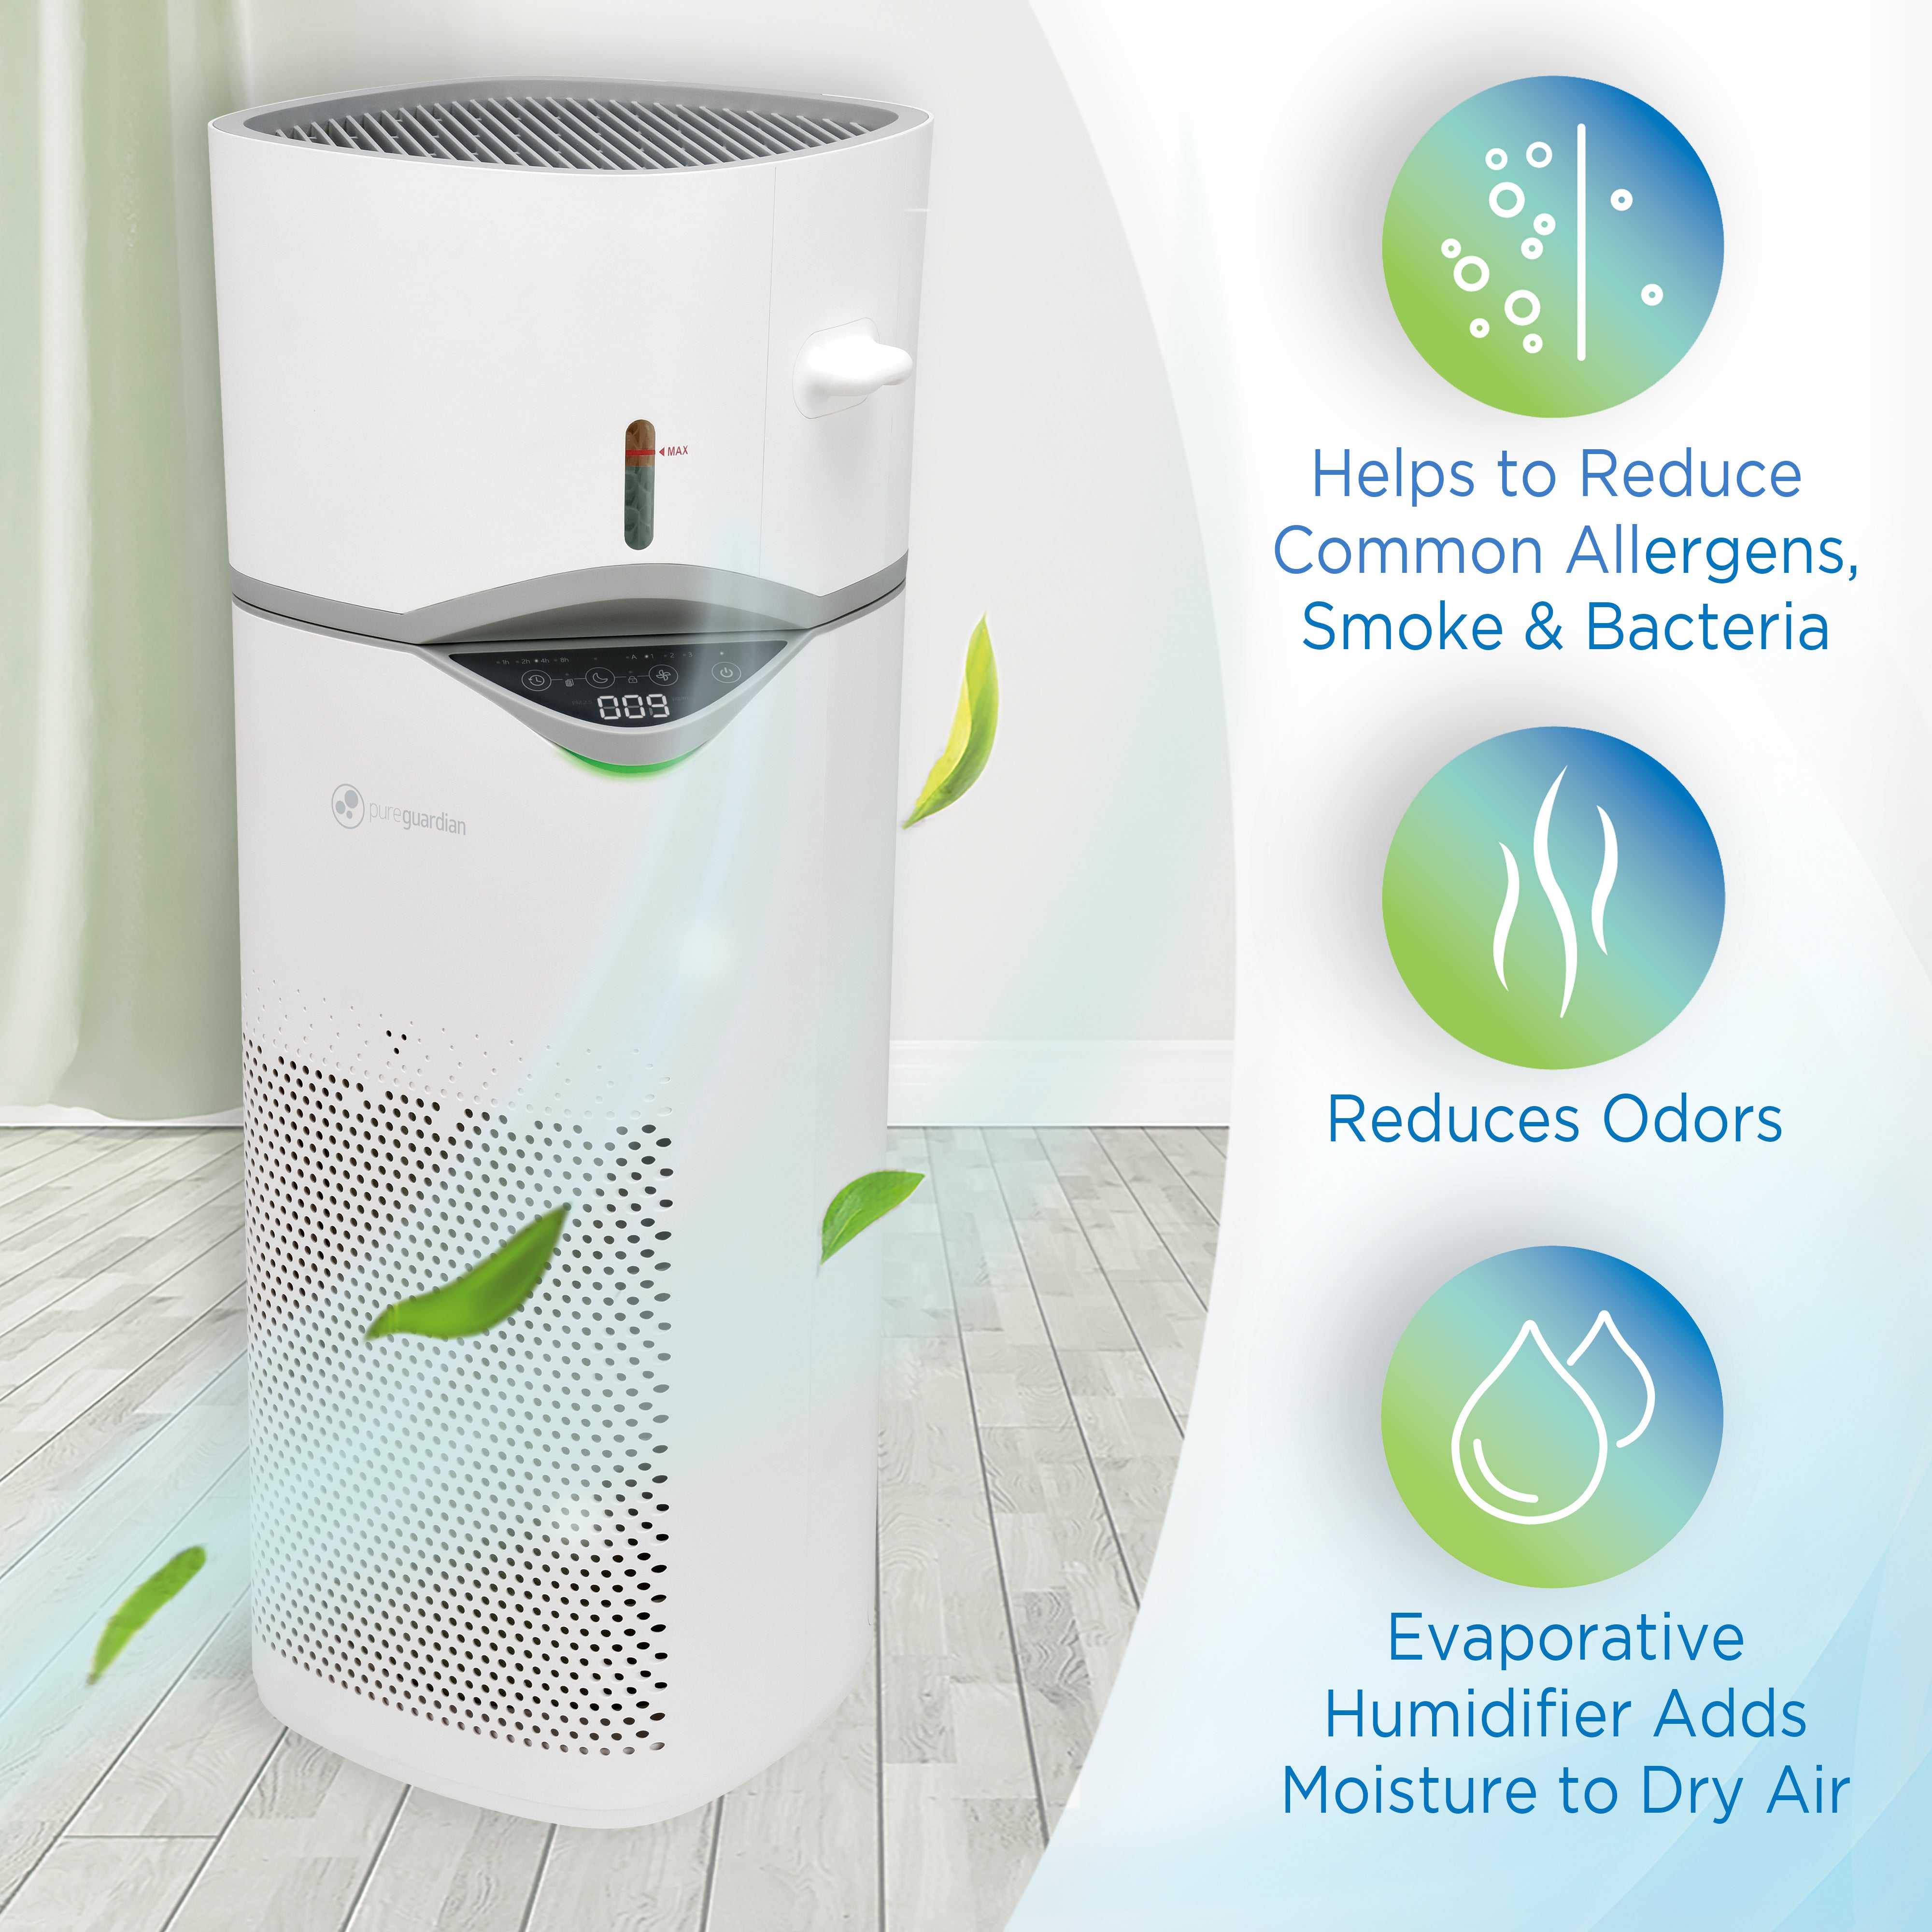 PureGuardian APH406W 2-in-1 Air Purifier with HEPA Filter and Humidifier - All Season Console for Large Rooms